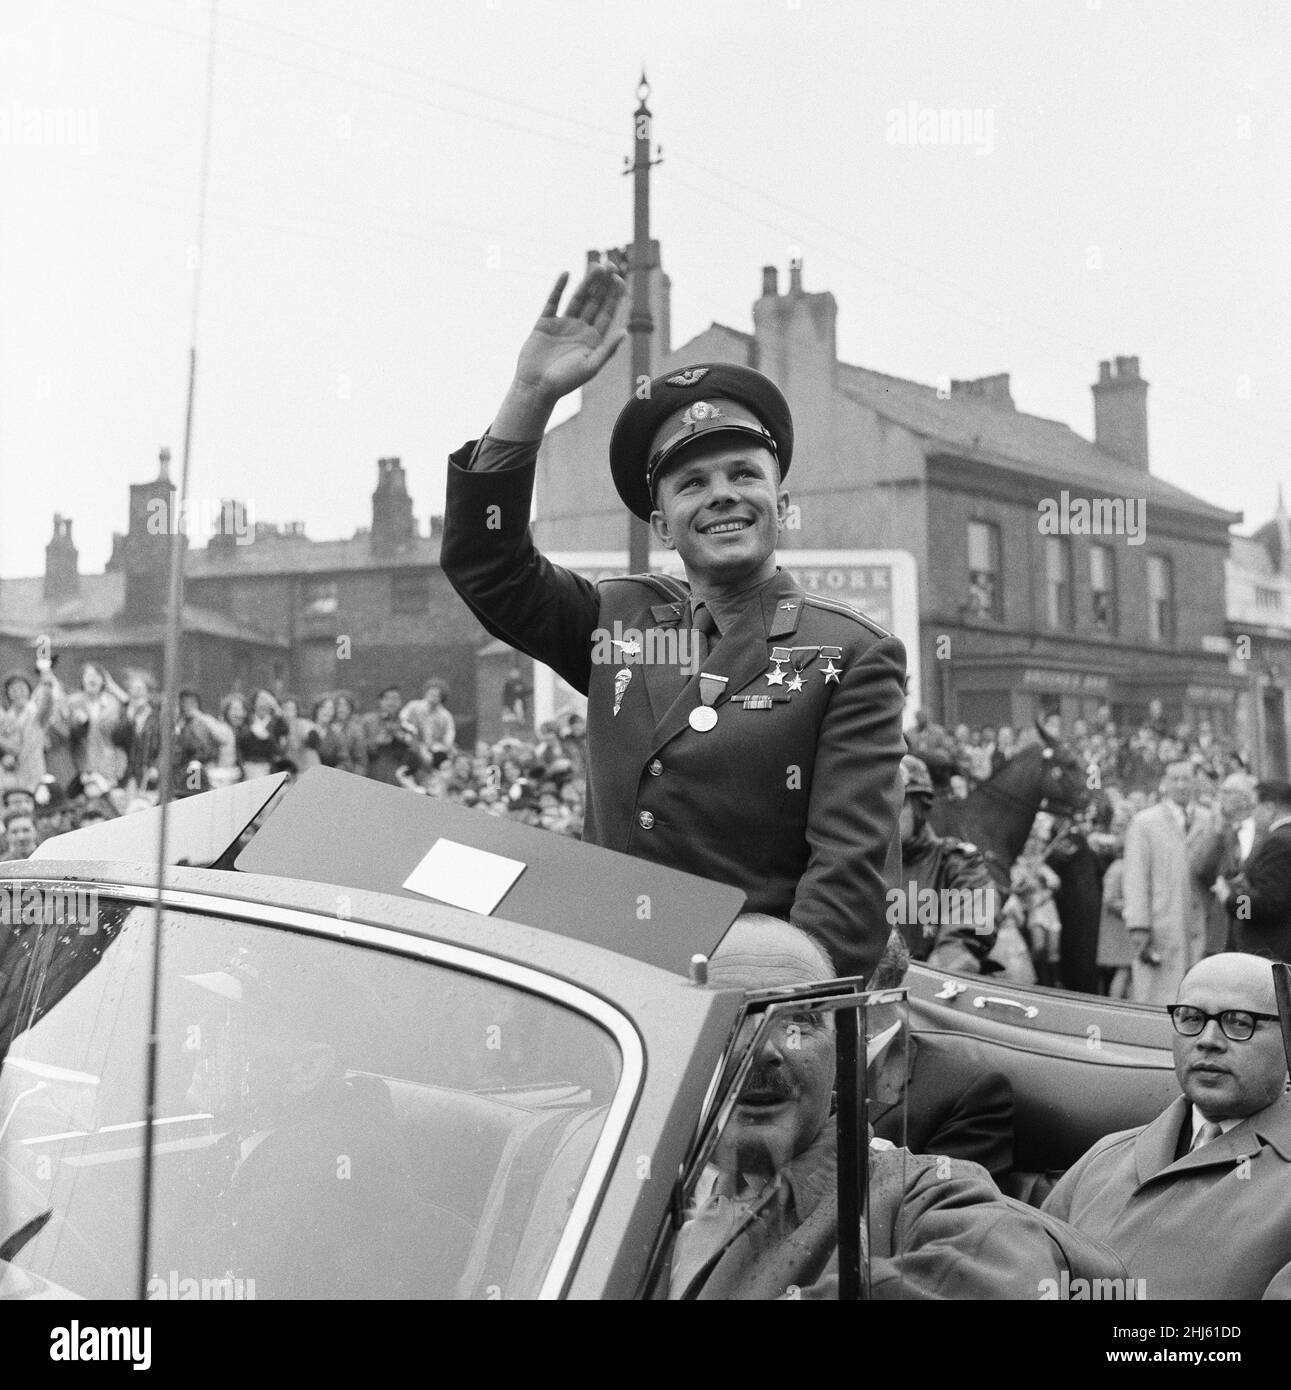 Yuri Gagarin,  Soviet Cosmonaut, the first human to journey into outer space when his Vostok spacecraft completed an orbit of the Earth (12th April 1961), visits Britain, Tuesday 11th July 1961. Our picture shows ... Yuri Gagarin is greeted by large welcoming crowds of people lining the streets of London, waving, cheering and clapping as his motorcade makes the 14 mile route to the Russian Embassy in Kensington Palace Gardens. Stock Photo